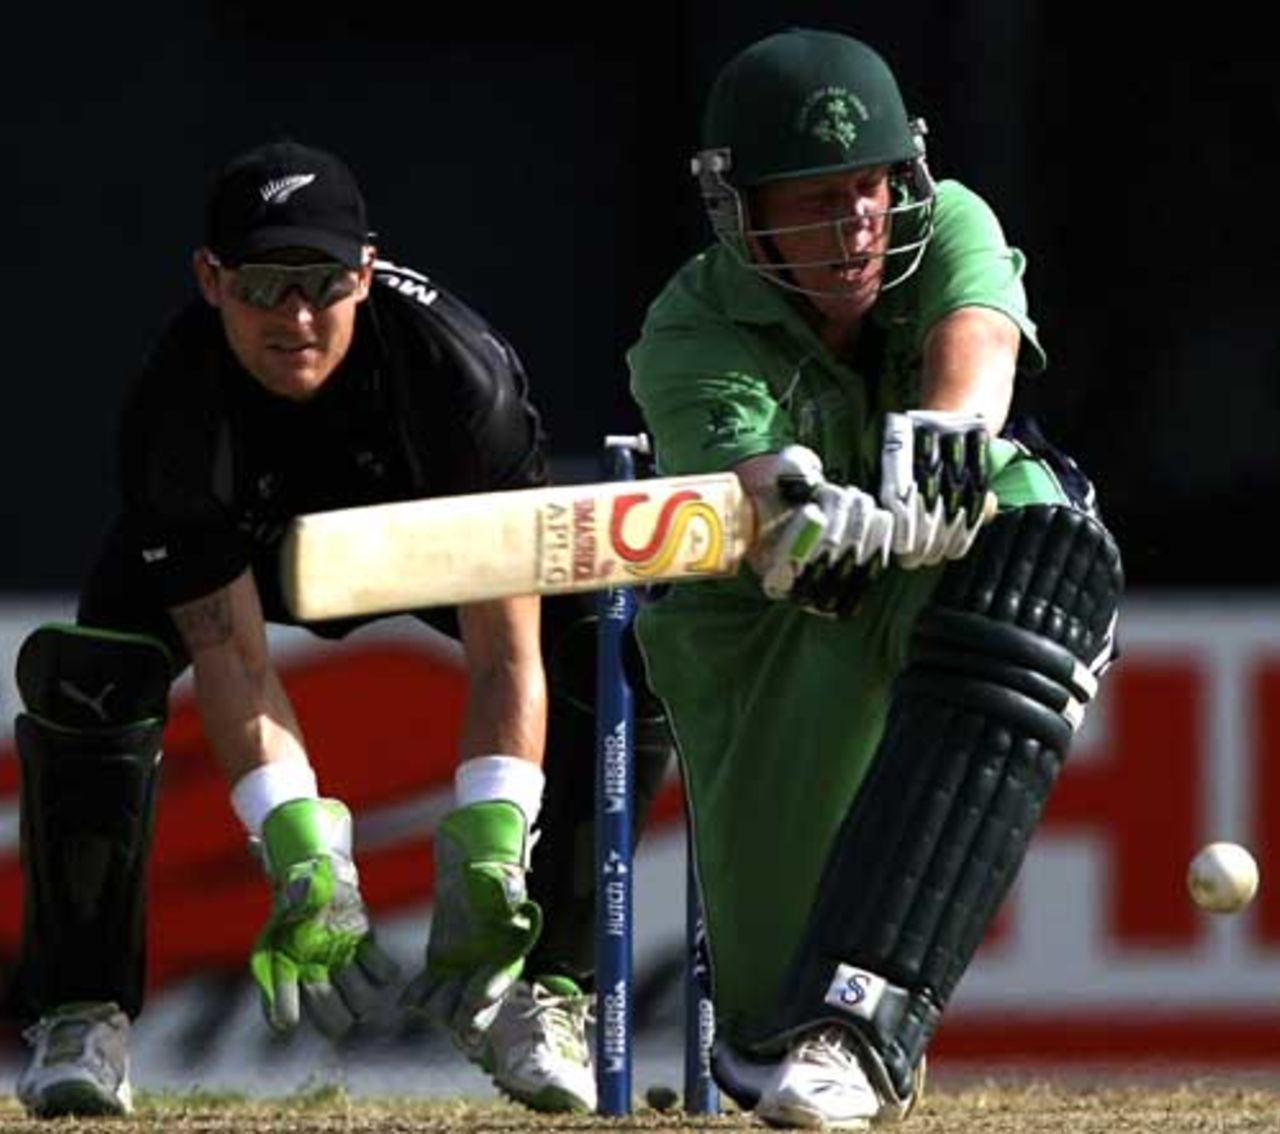 Kevin O'Brien sweeps against the spin, Ireland v New Zealand, Super Eights, Guyana, April 9, 2007